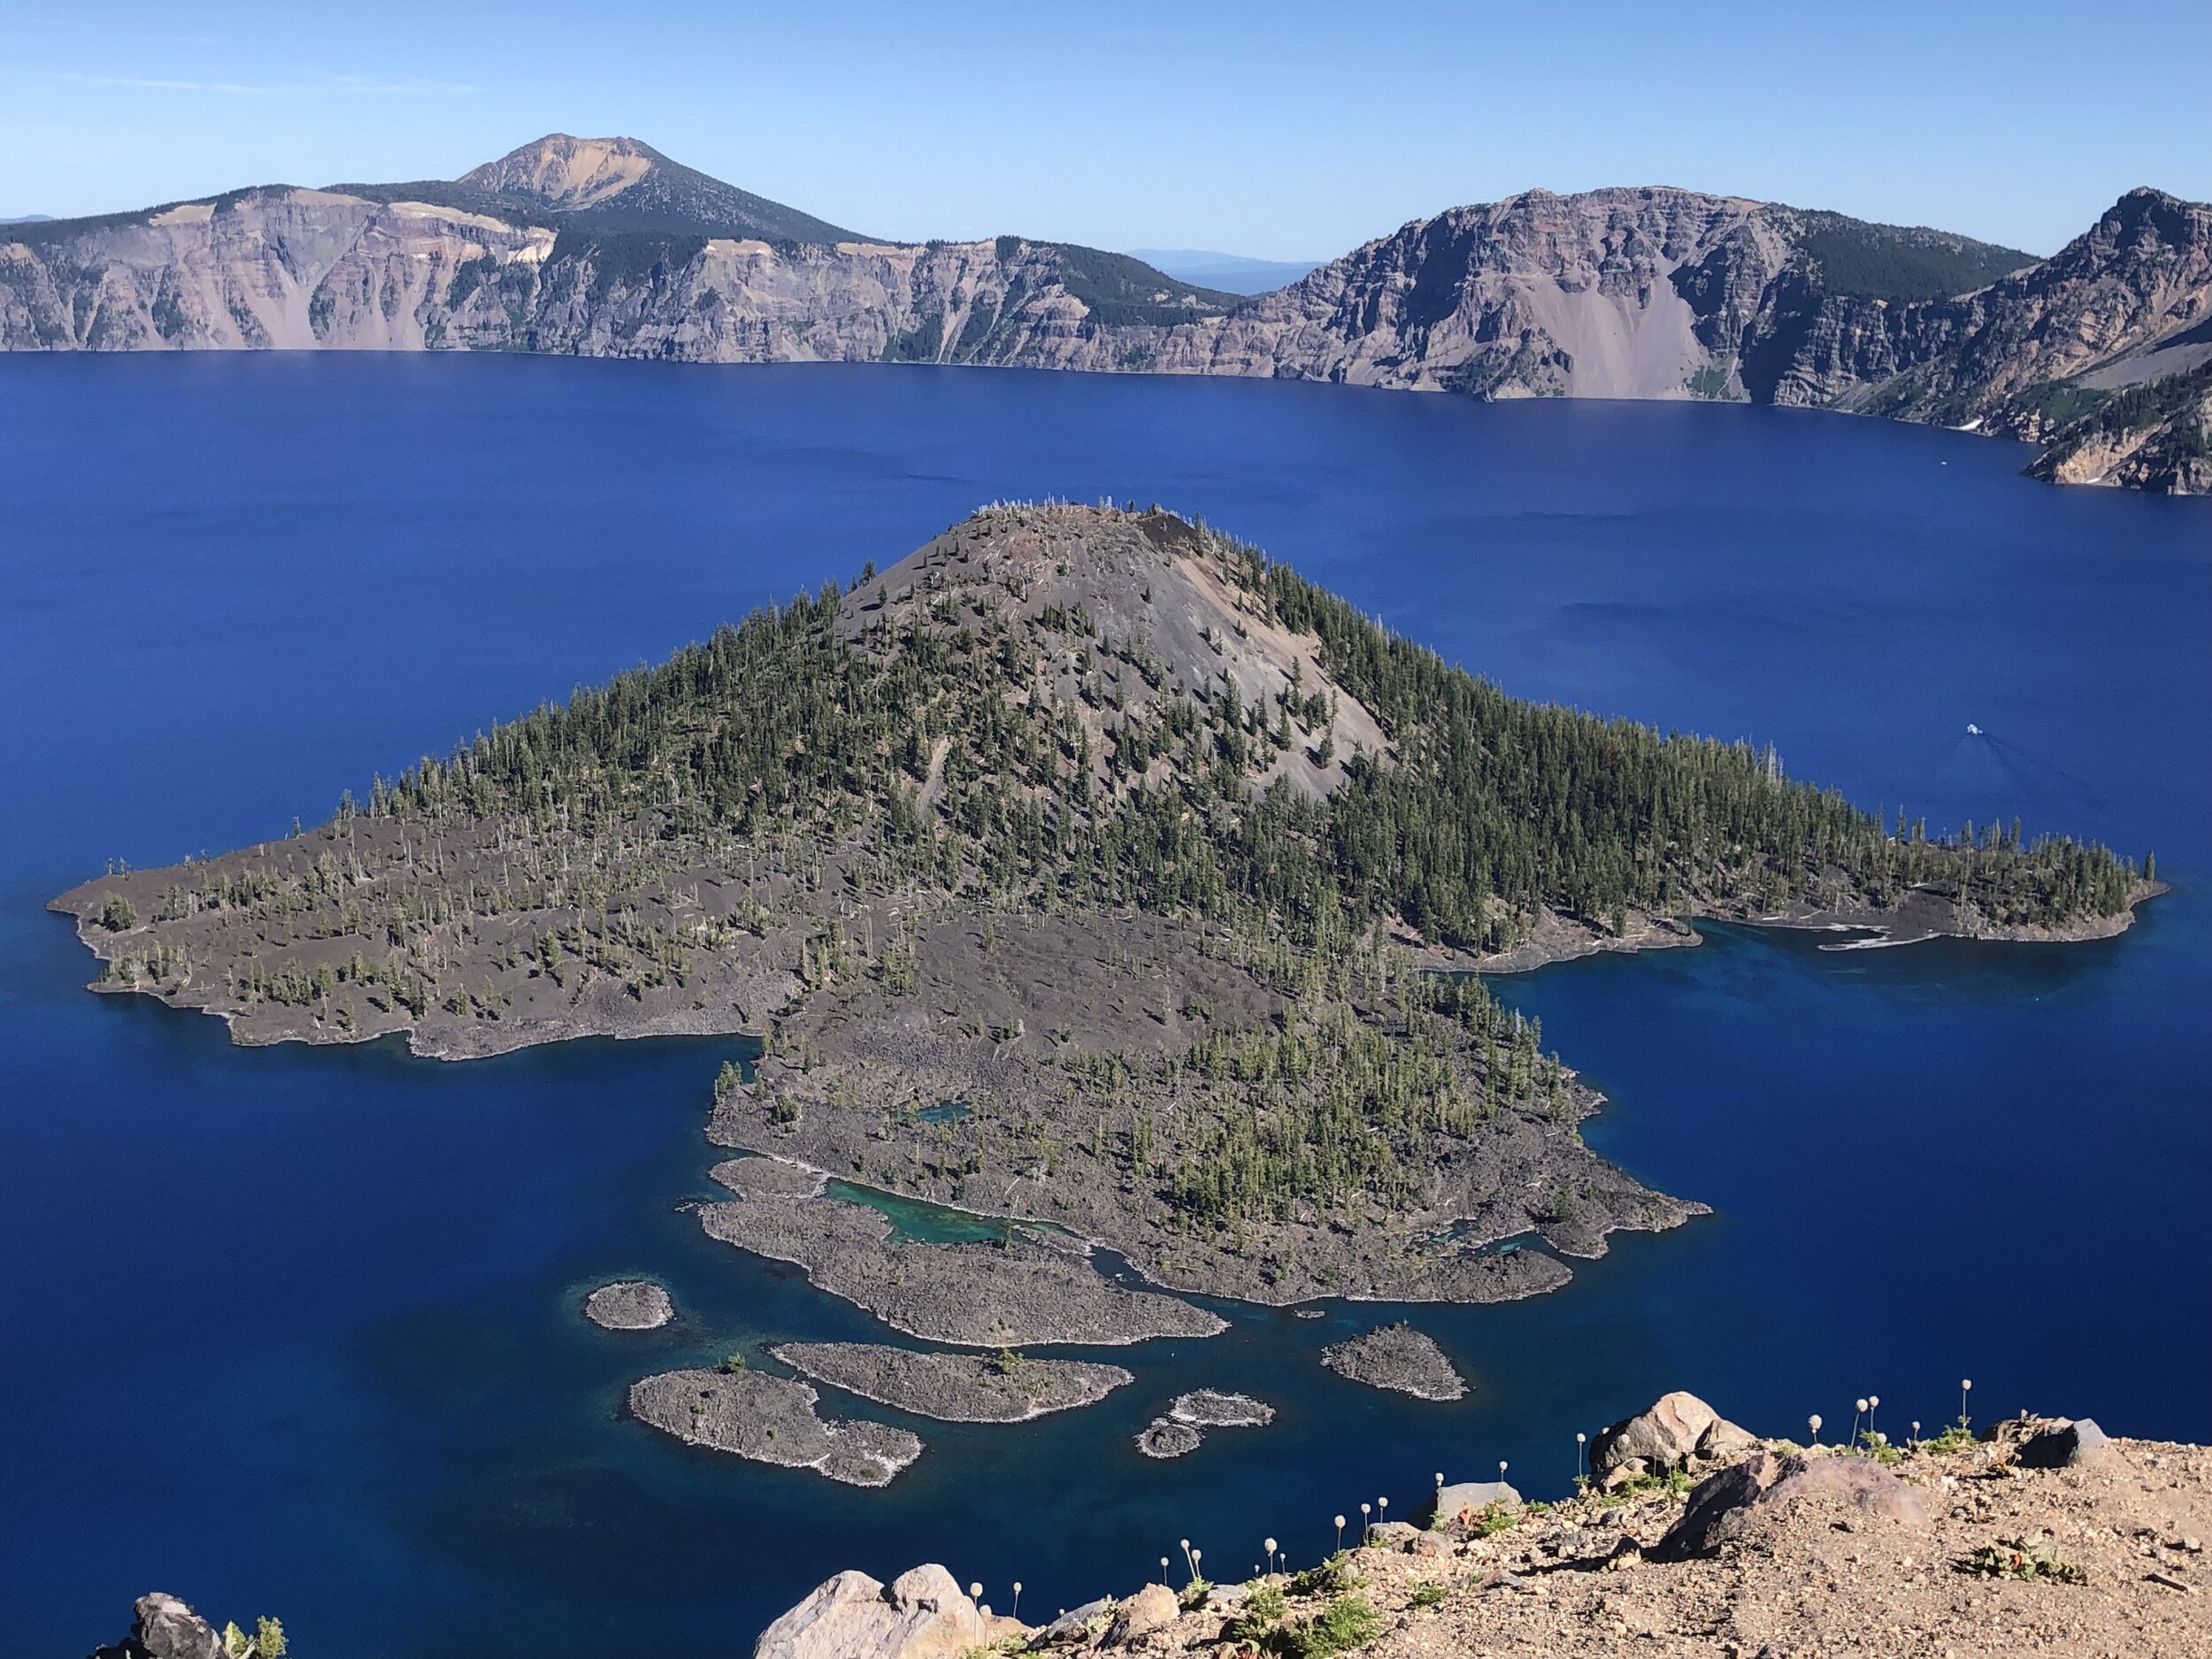 At Crater Lake National Park a deep freshwater lake lies within the original volcano; a cinder cone rises from the depths.